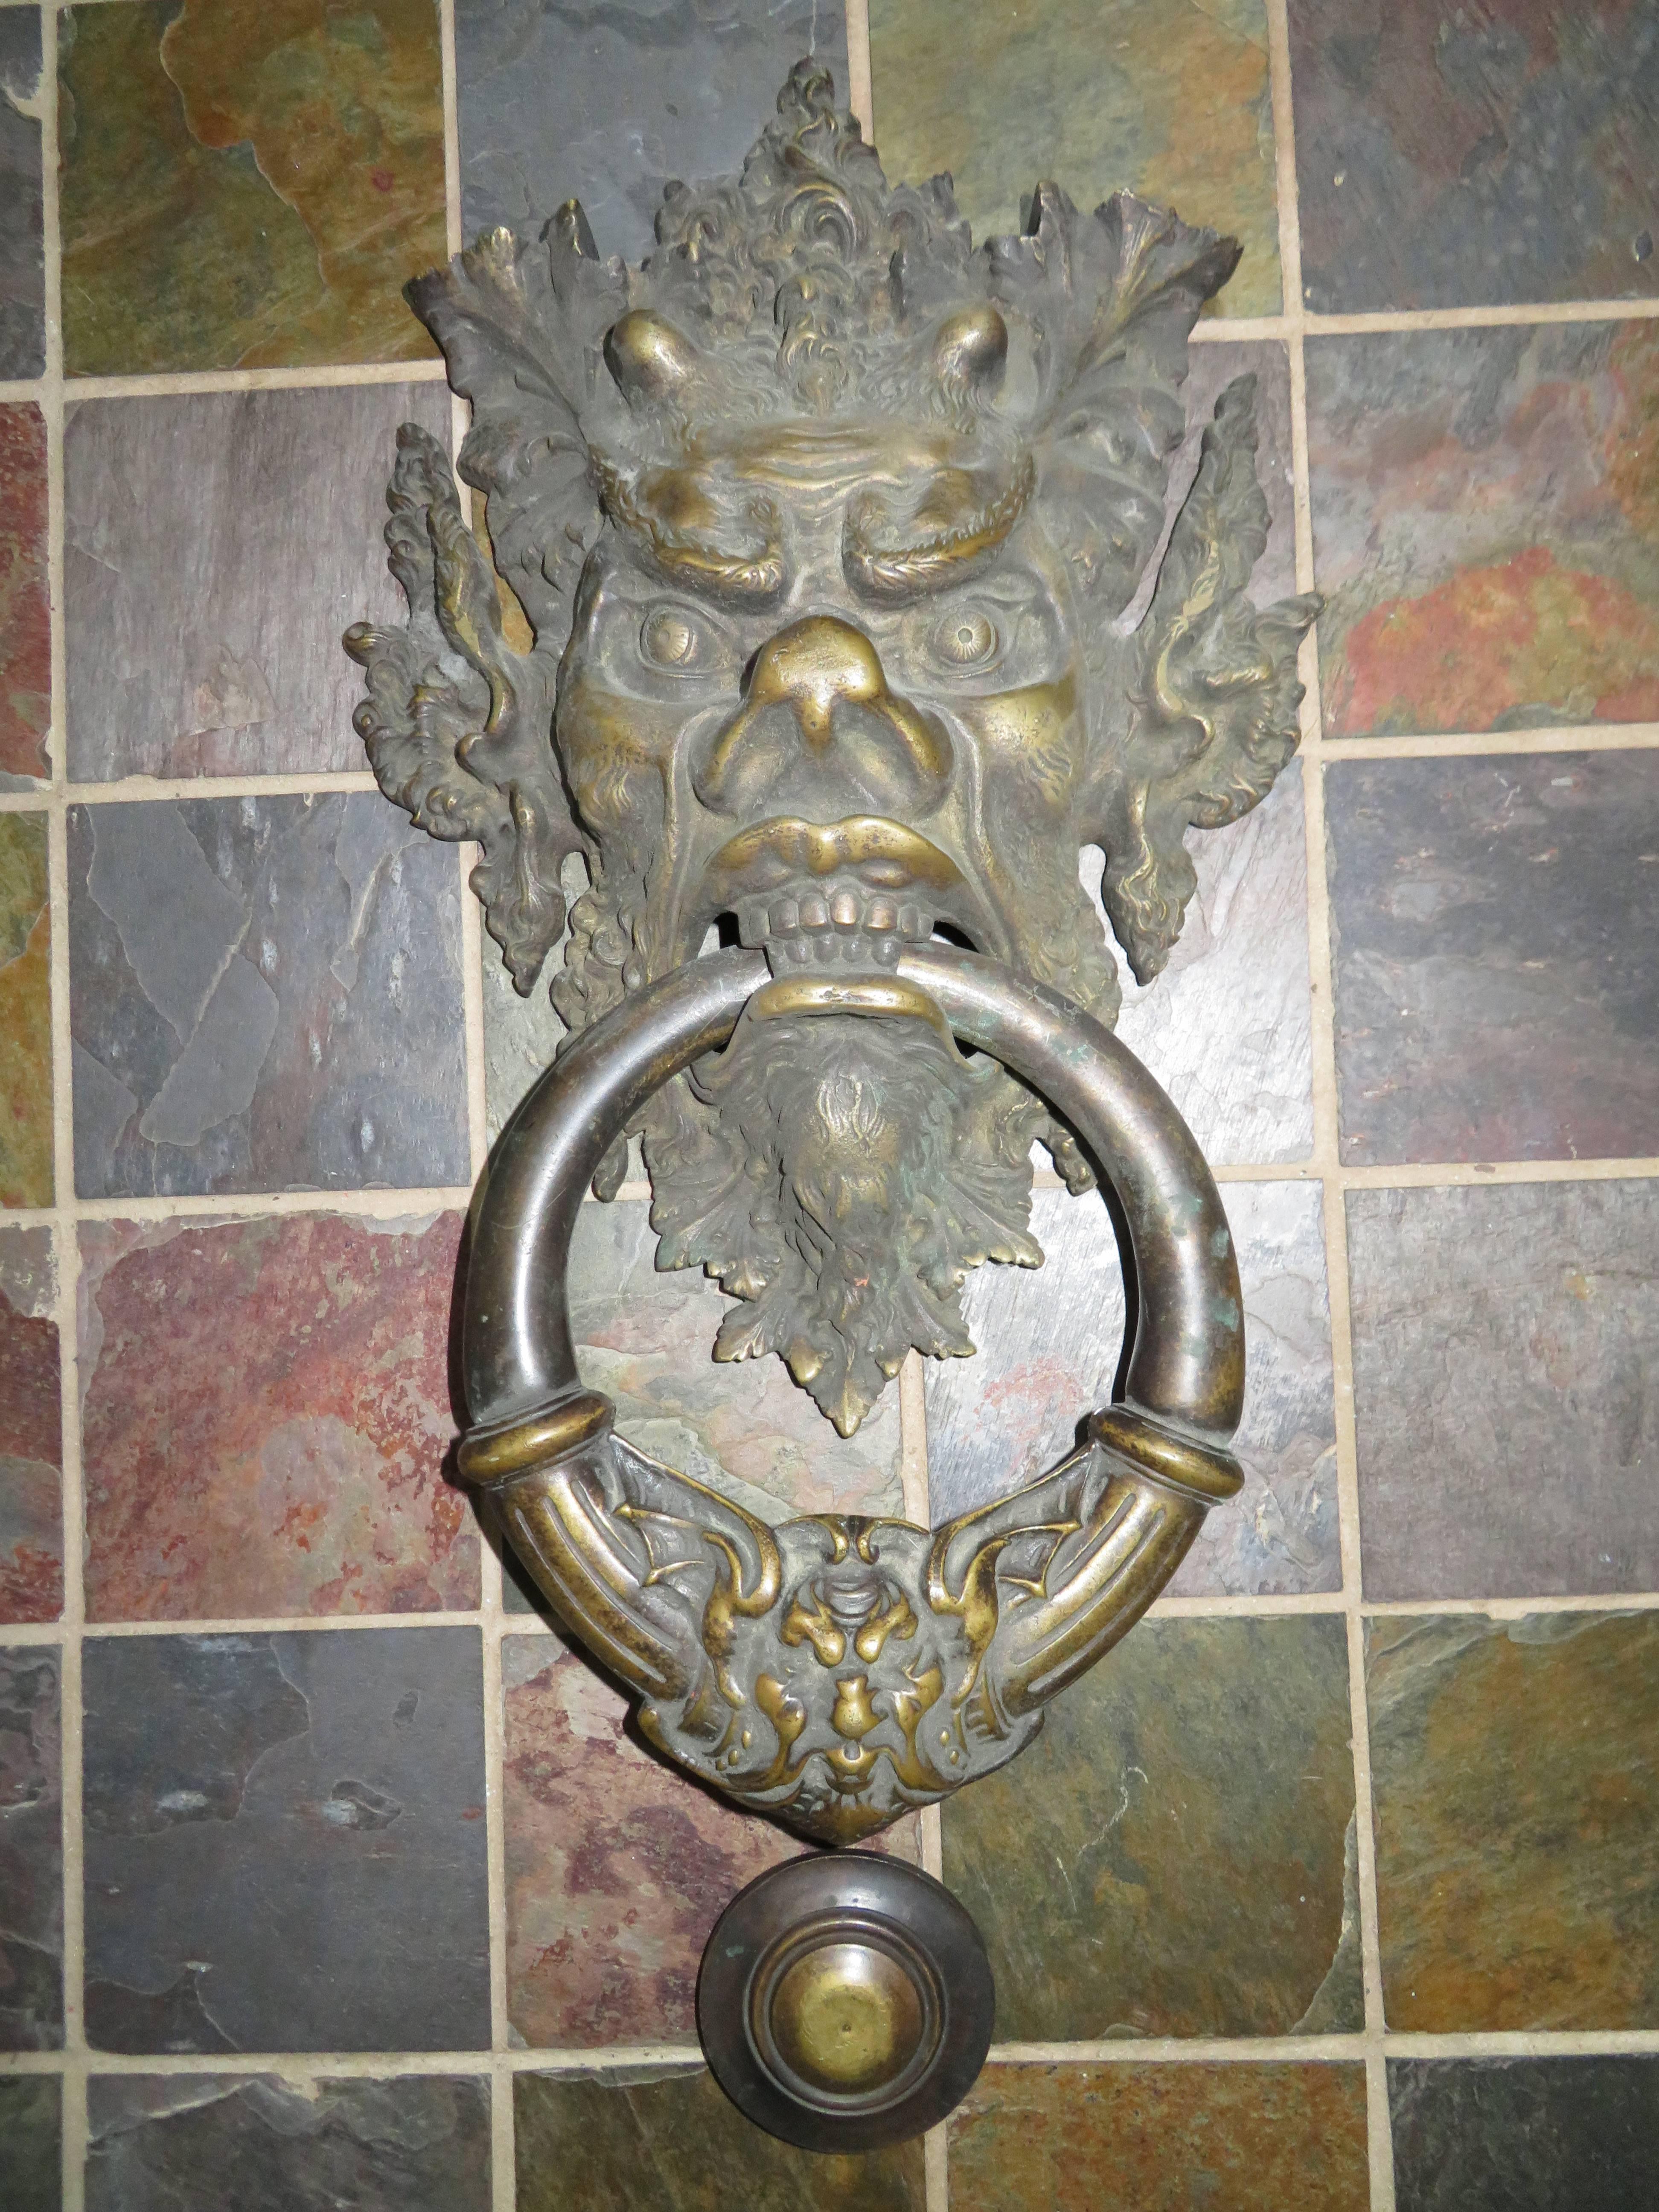 Awesome large-scale antique Italian bronze Vecchio Greenman door knocker. With a resonant knock worthy of the great hall of any castle, this truly massive piece is not for any ordinary door! This is an original bronze piece from the turn of the